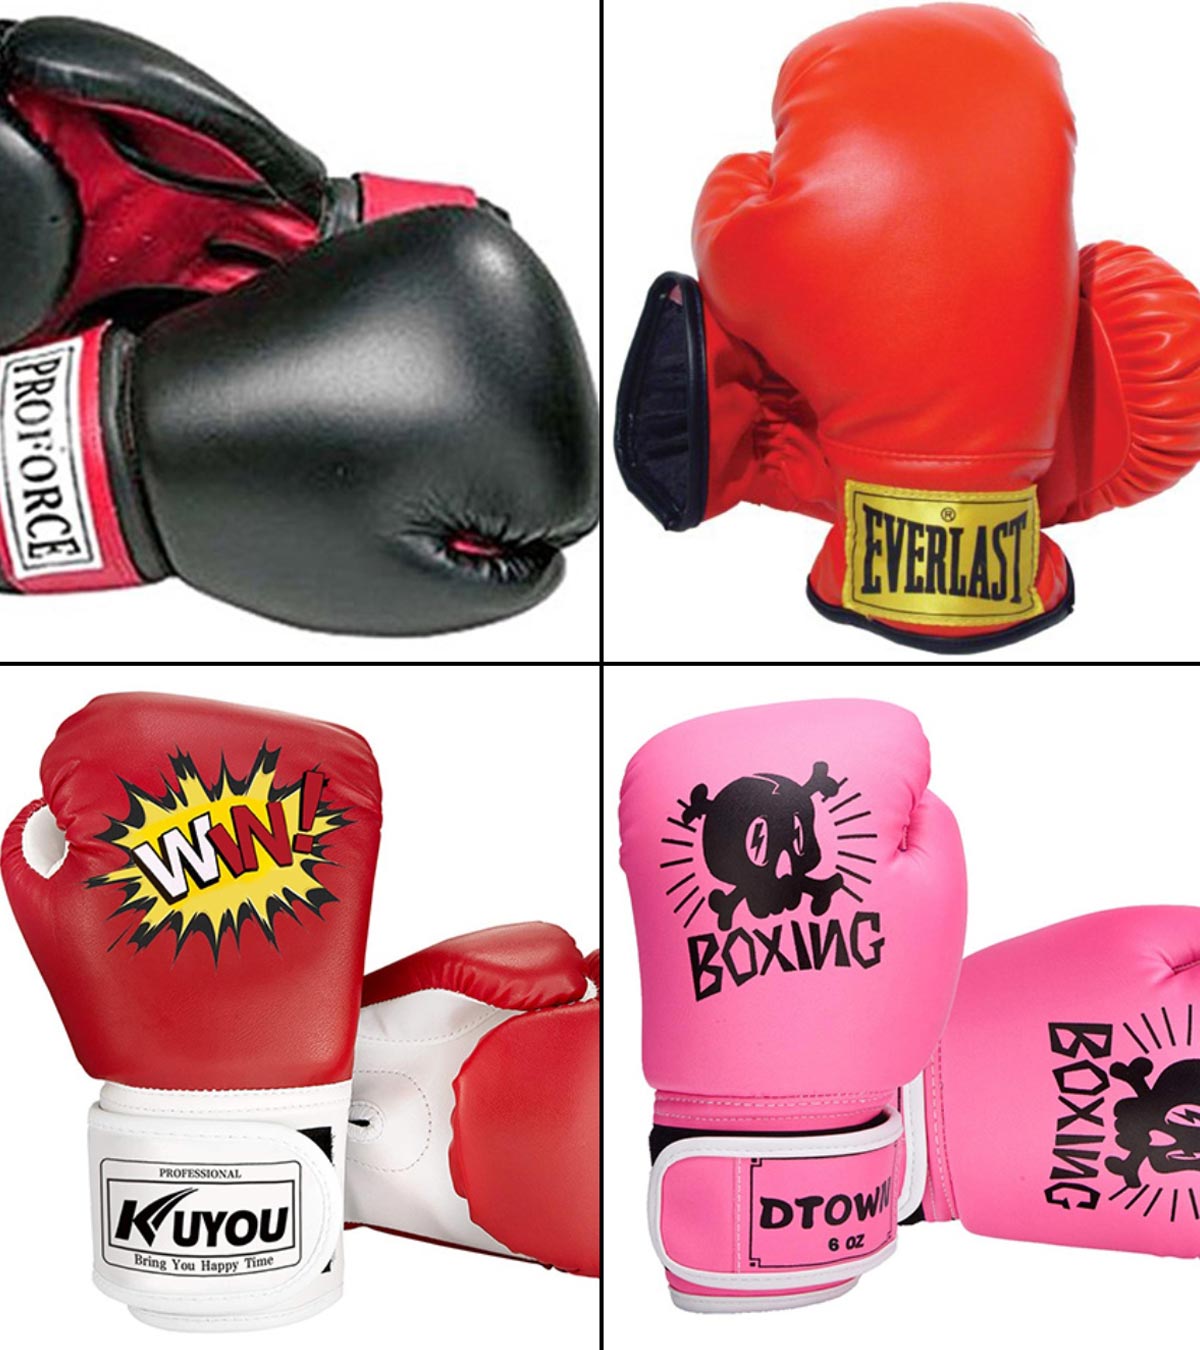 Liberlupus Kids Boxing Gloves Training Boxing Gloves for Kids Age 3-15 Protective Youth Boxing Gloves with Multiple Color & Size